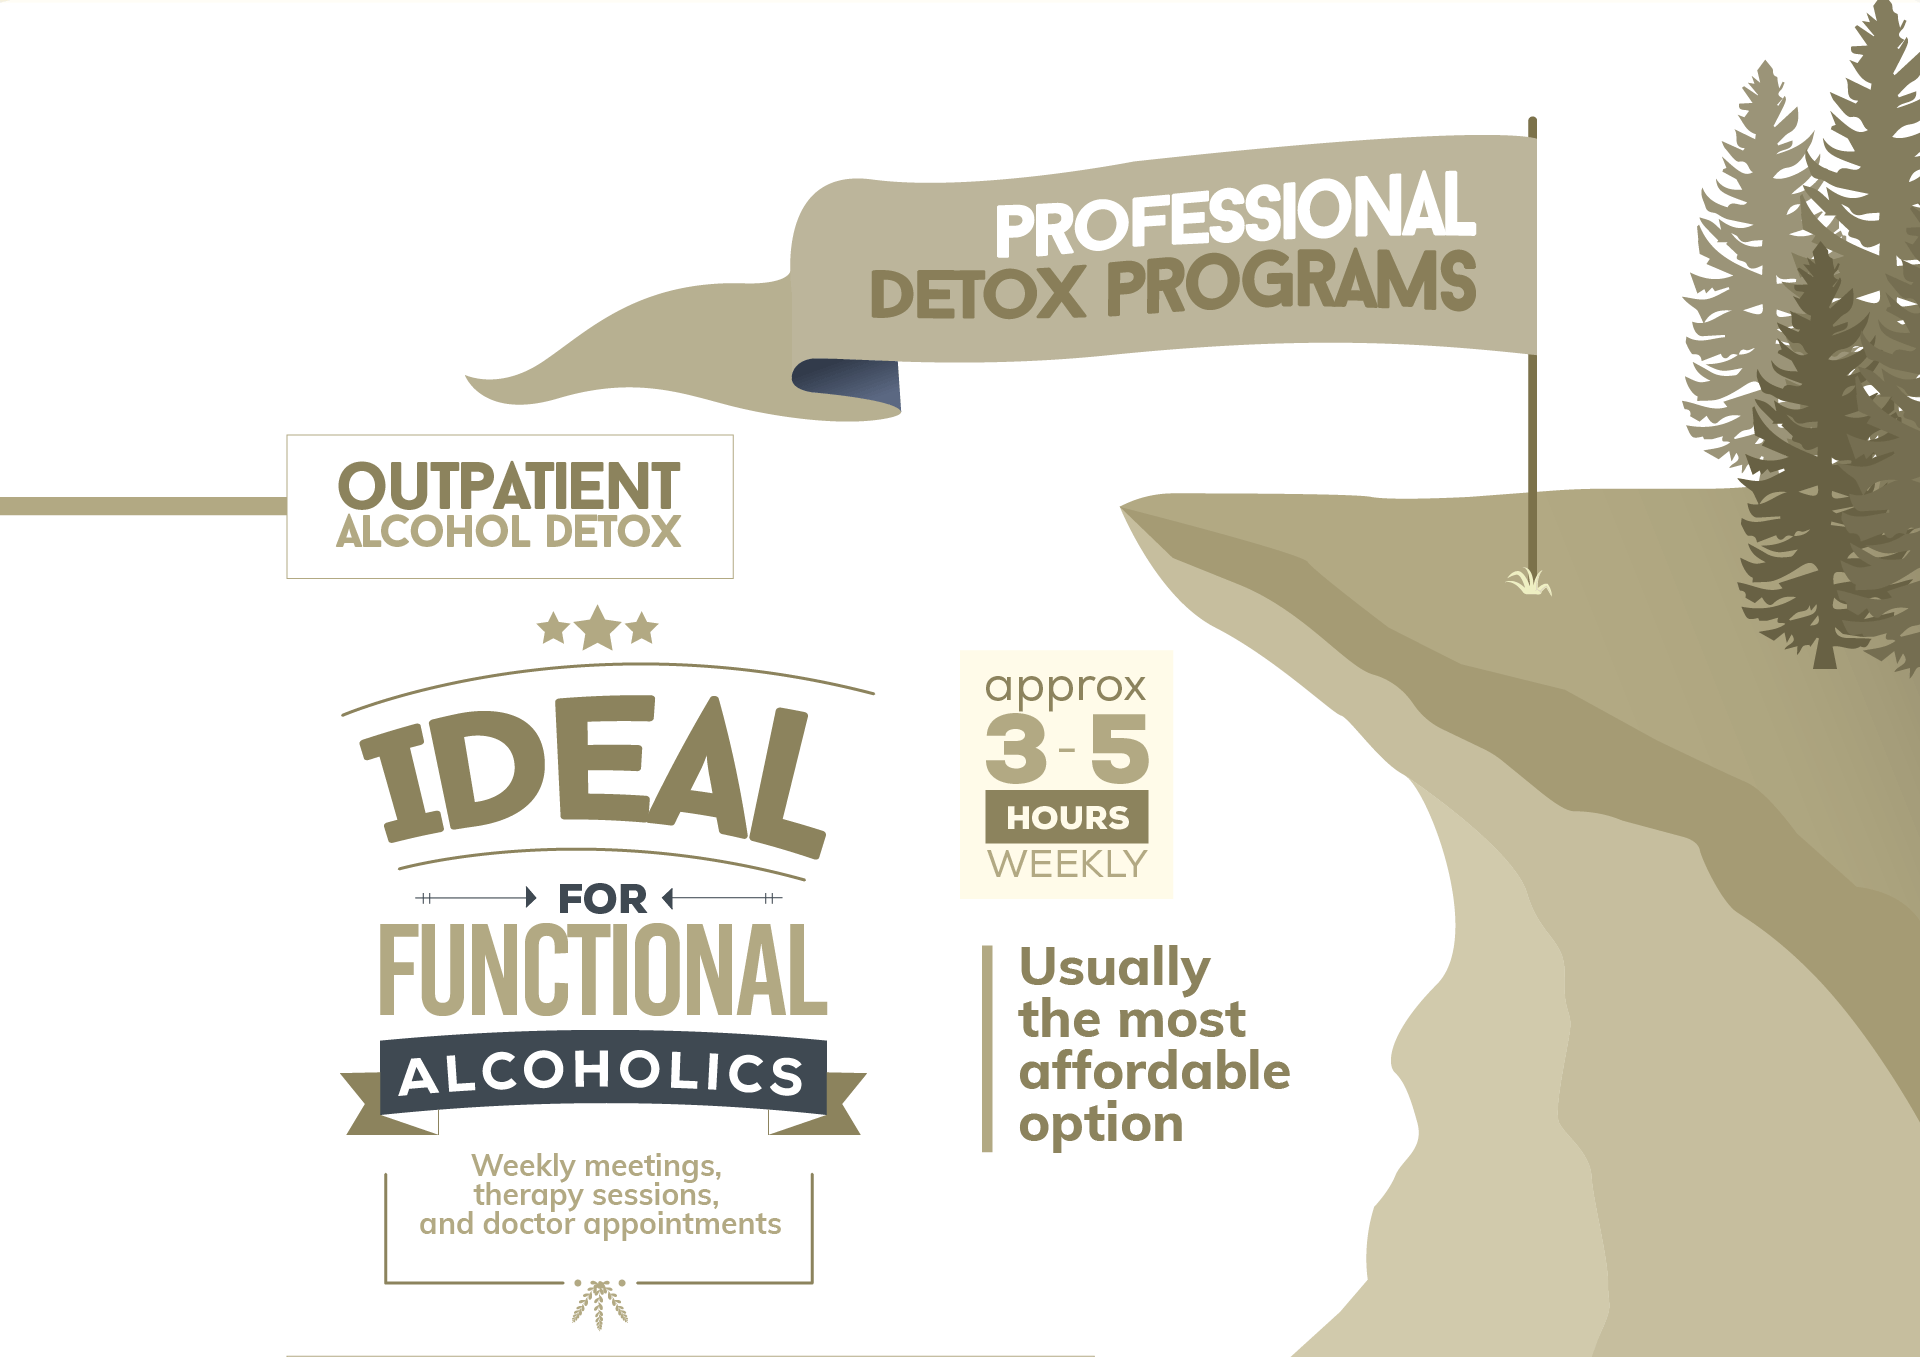 We have the outpatient alcohol detox programs, is ideal for functional alcoholics, in this program you have weekly meetings, therapy sessions, and doctor appointments, it takes approximately 3 to 5 hours weekly and this program is usually the most affordable option